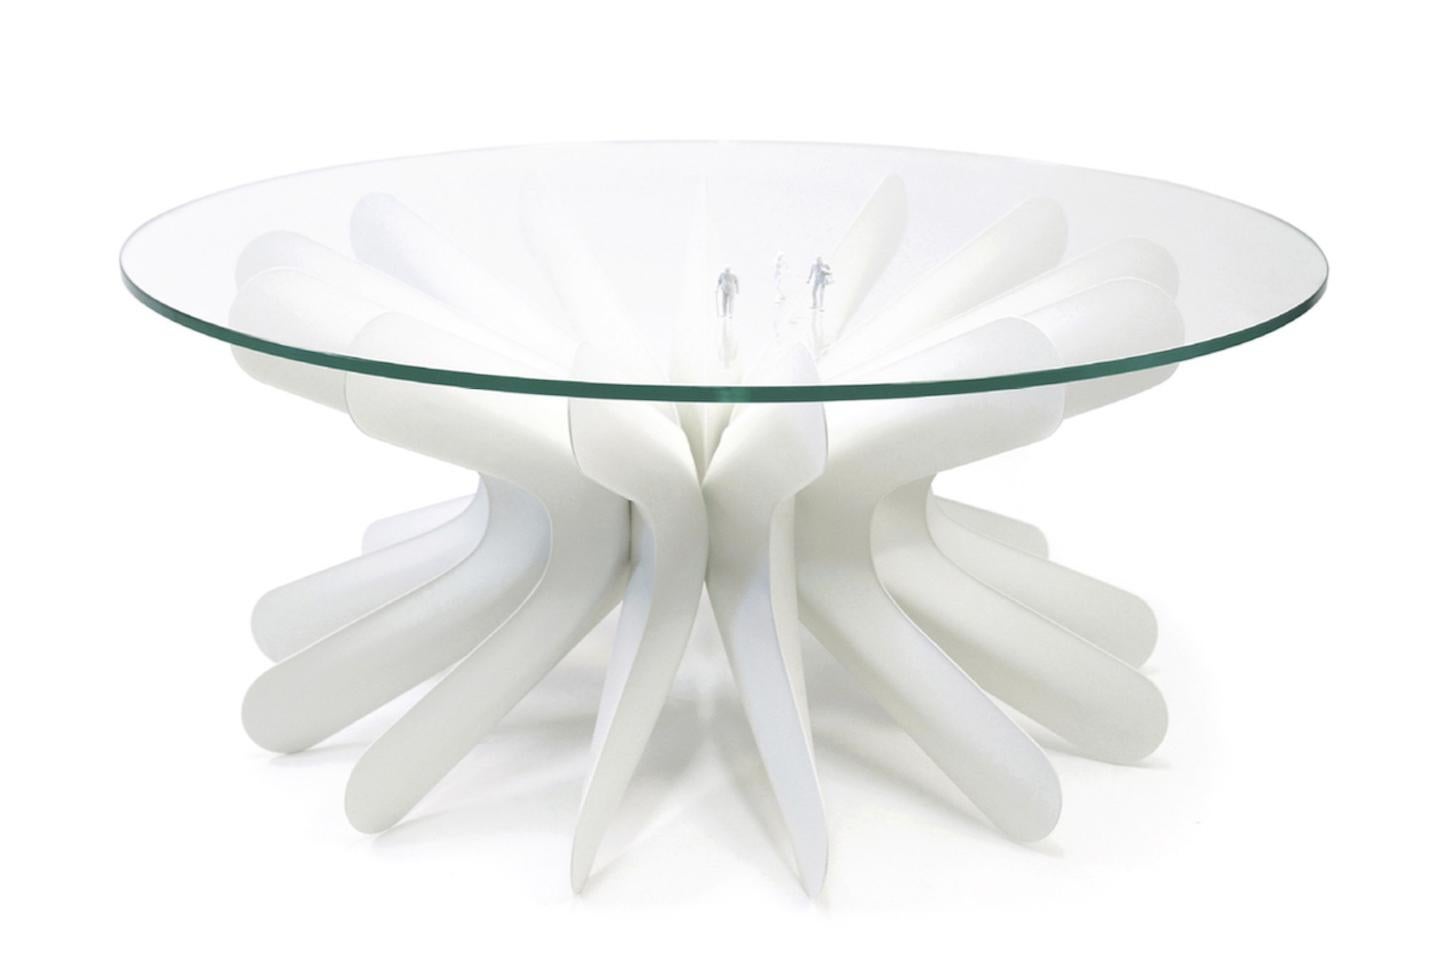 Polish Contemporary Coffee Table 'Steel in Rotation No. 1' by Zieta, Stainless Steel For Sale